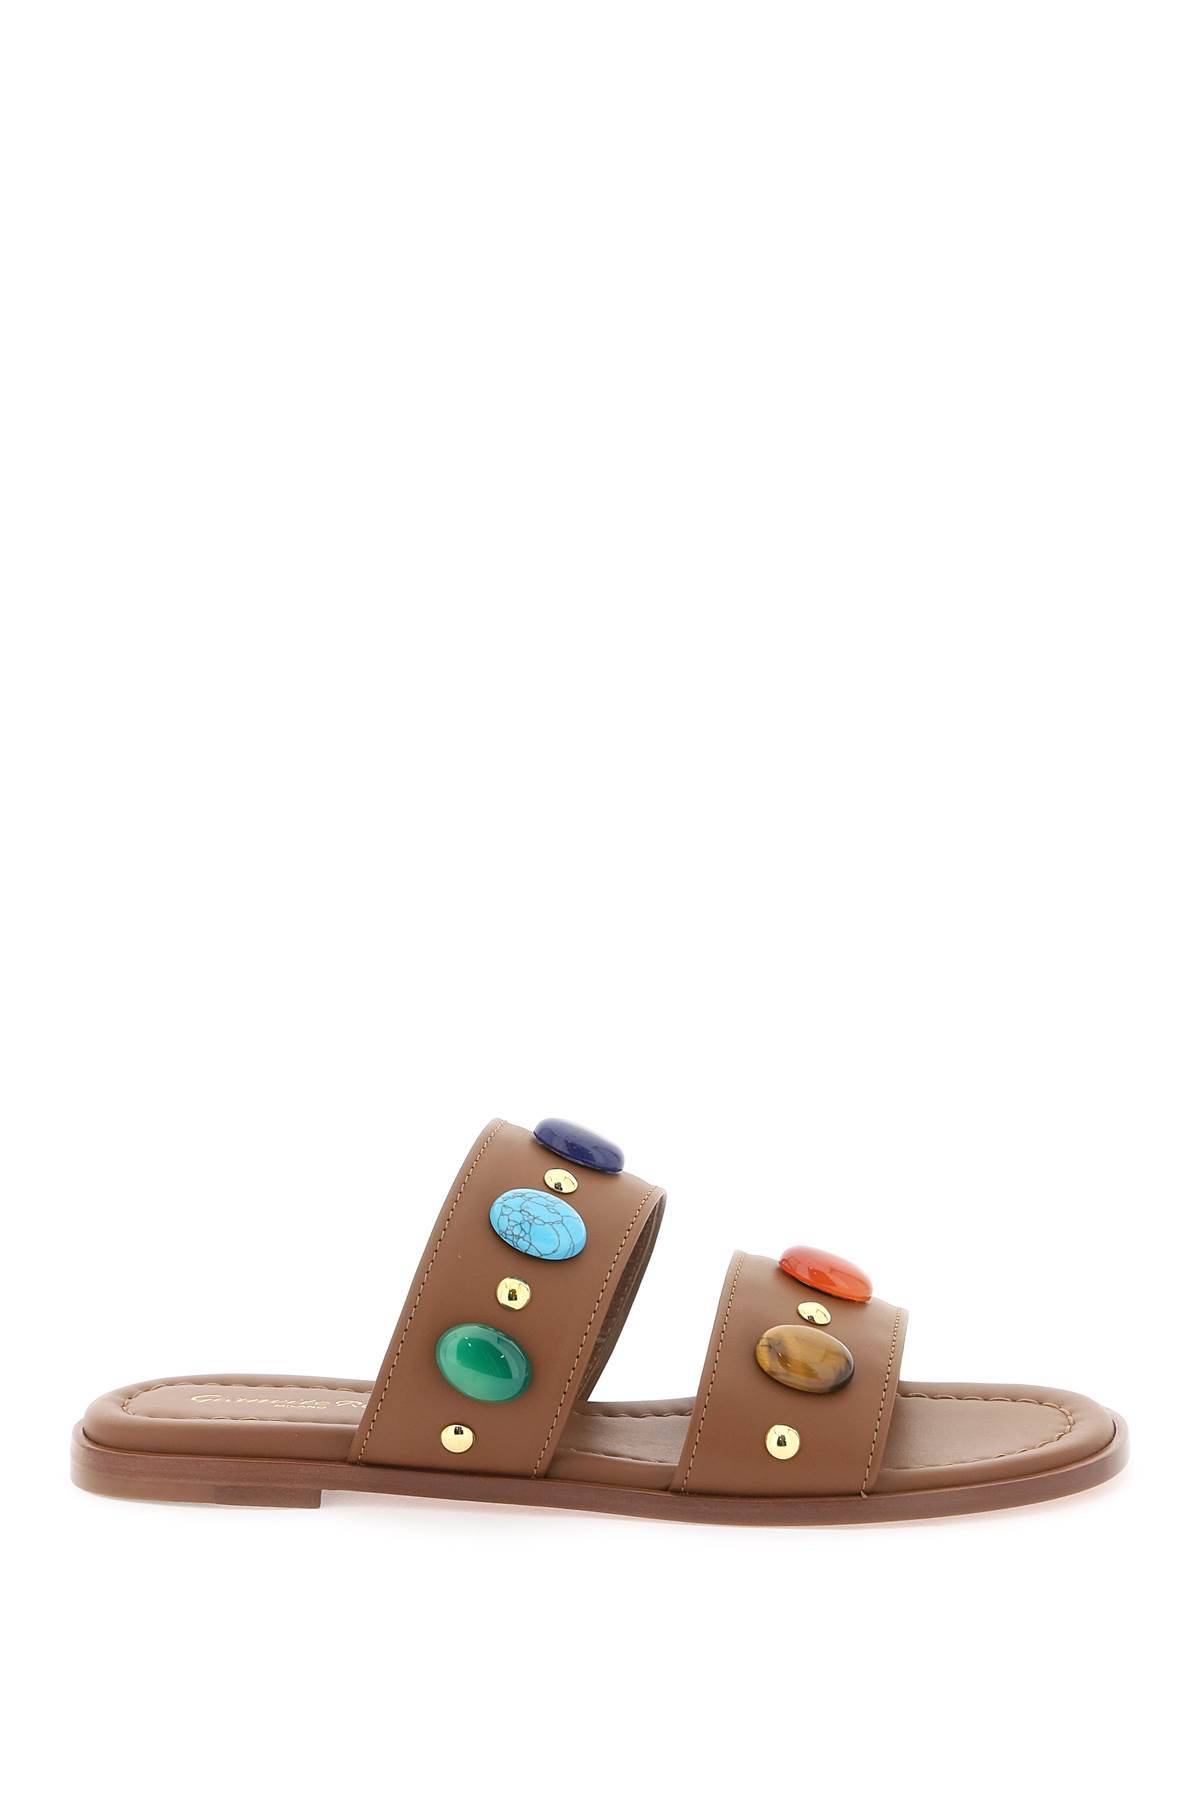 Gianvito Rossi GIANVITO ROSSI "slides with natural stone embell